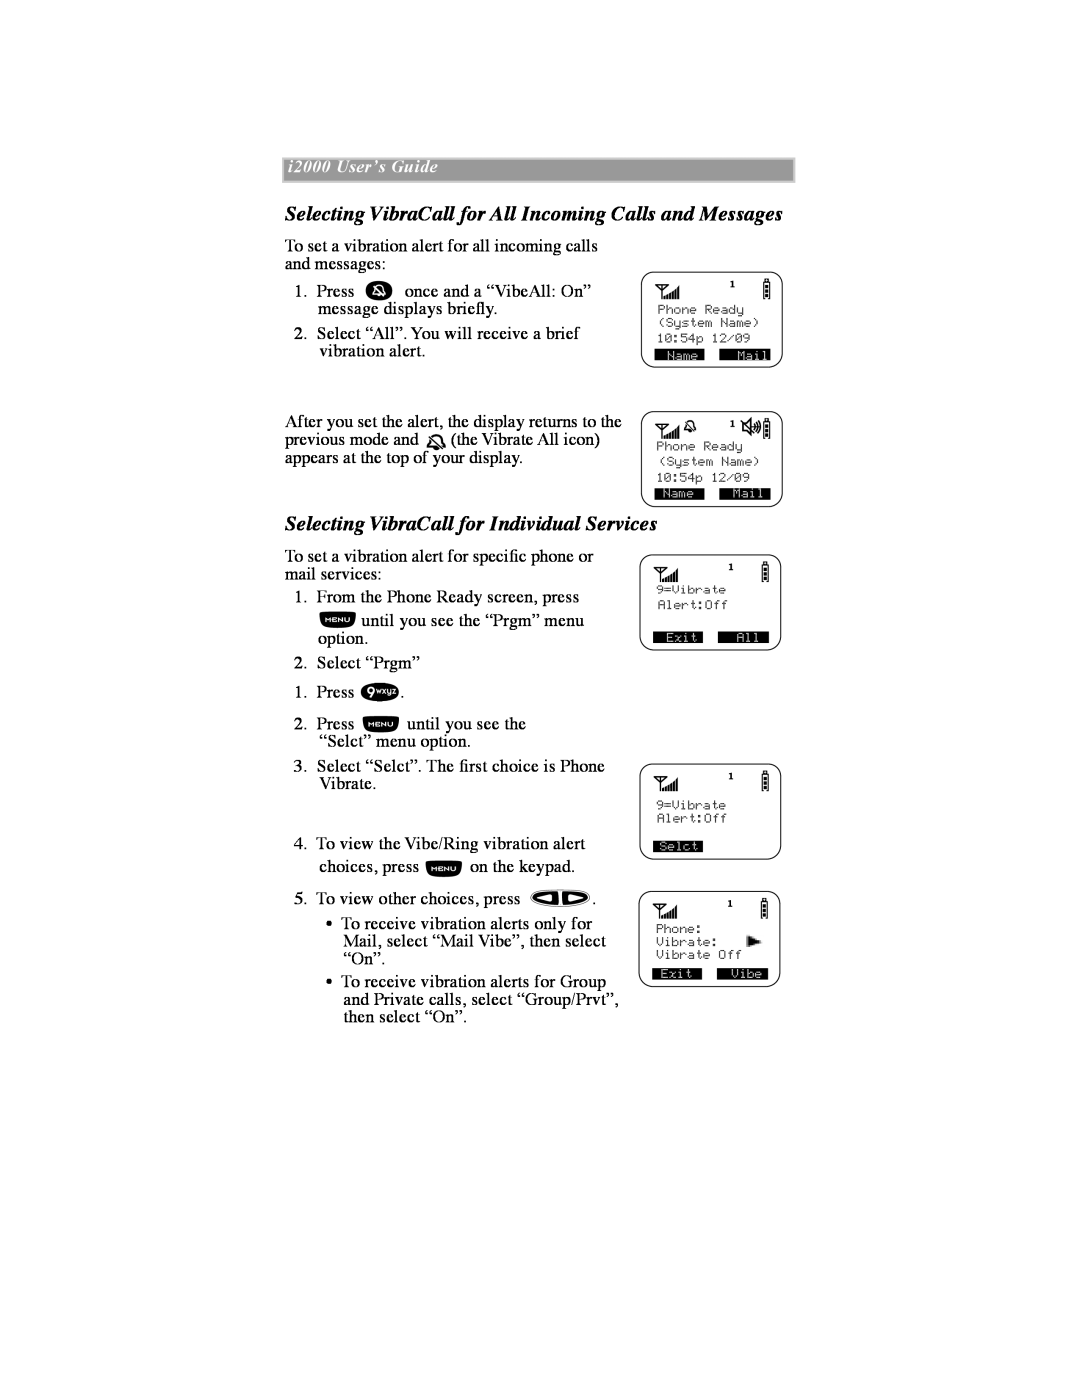 Motorola iDEN manual Selecting VibraCall for All Incoming Calls and Messages, Selecting VibraCall for Individual Services 